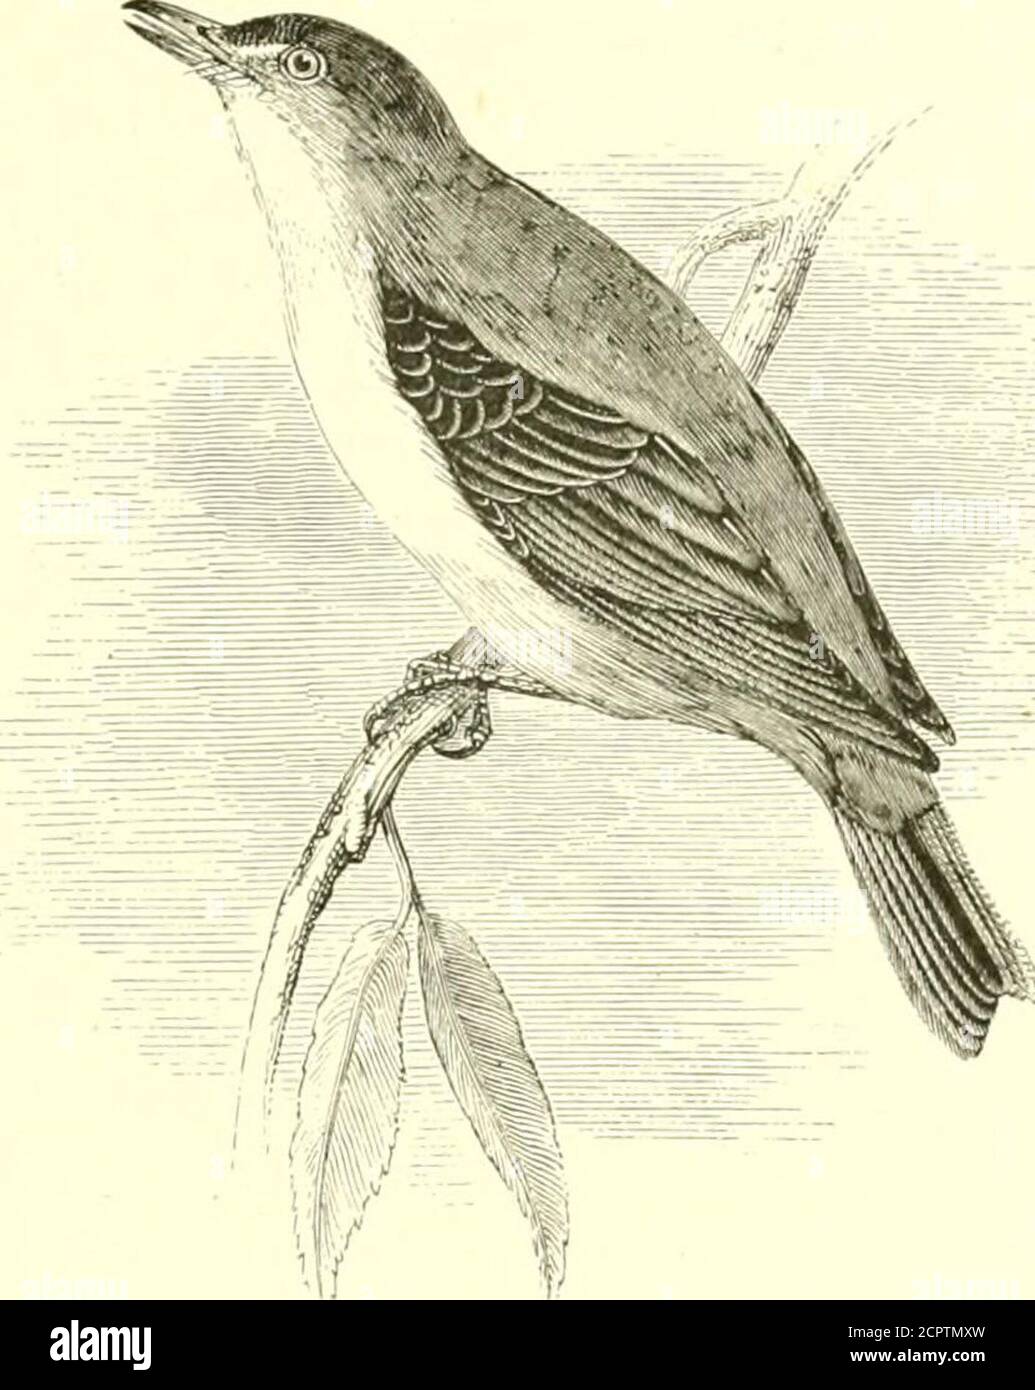 . An illustrated manual of British birds . ded tail; whence its Spanishnames of Alza-cola, and Alza-rabo. I have not found it to beat all shy, until it becomes conscious of being watched and followed :a proceeding which it naturally resents, as do most birds. Theoriginal English name of Rufous Sedge Warbler is remarkably inap-propriate, as the bird is never seen in sedges, and is rather partial toarid places. Its food consists of insects. The song is said toresemble that of the Redbreast. Adult male : upper parts chestnut-brown; a broad whitish streakabove the eye to the nape ; quills brown wi Stock Photo